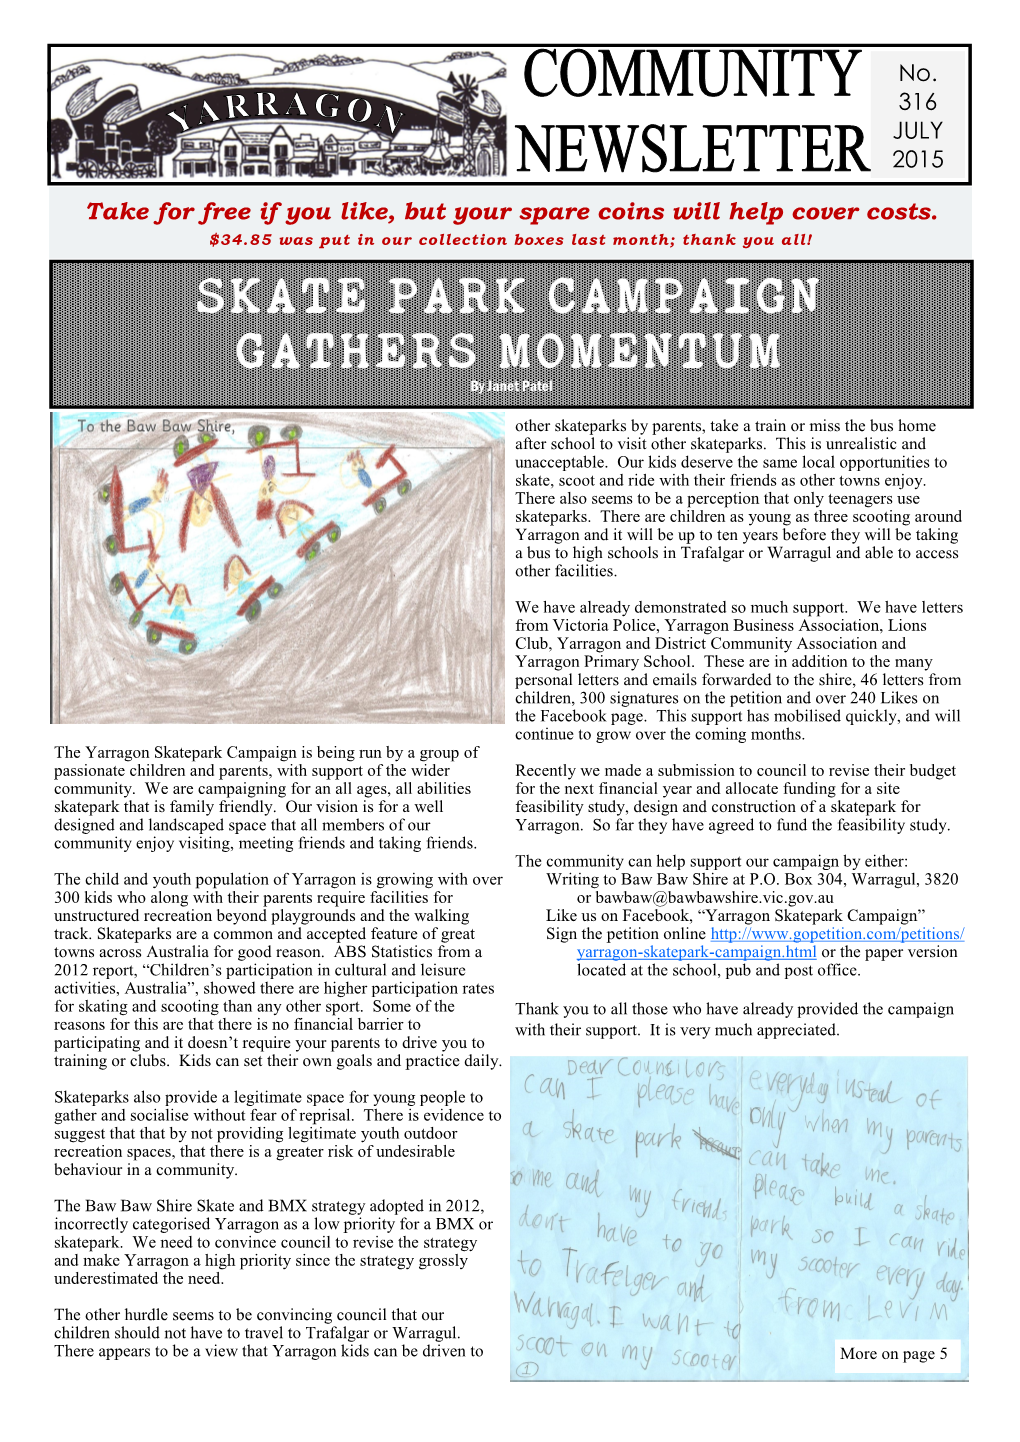 SKATE PARK CAMPAIGN GATHERS MOMENTUM by Janet Patel